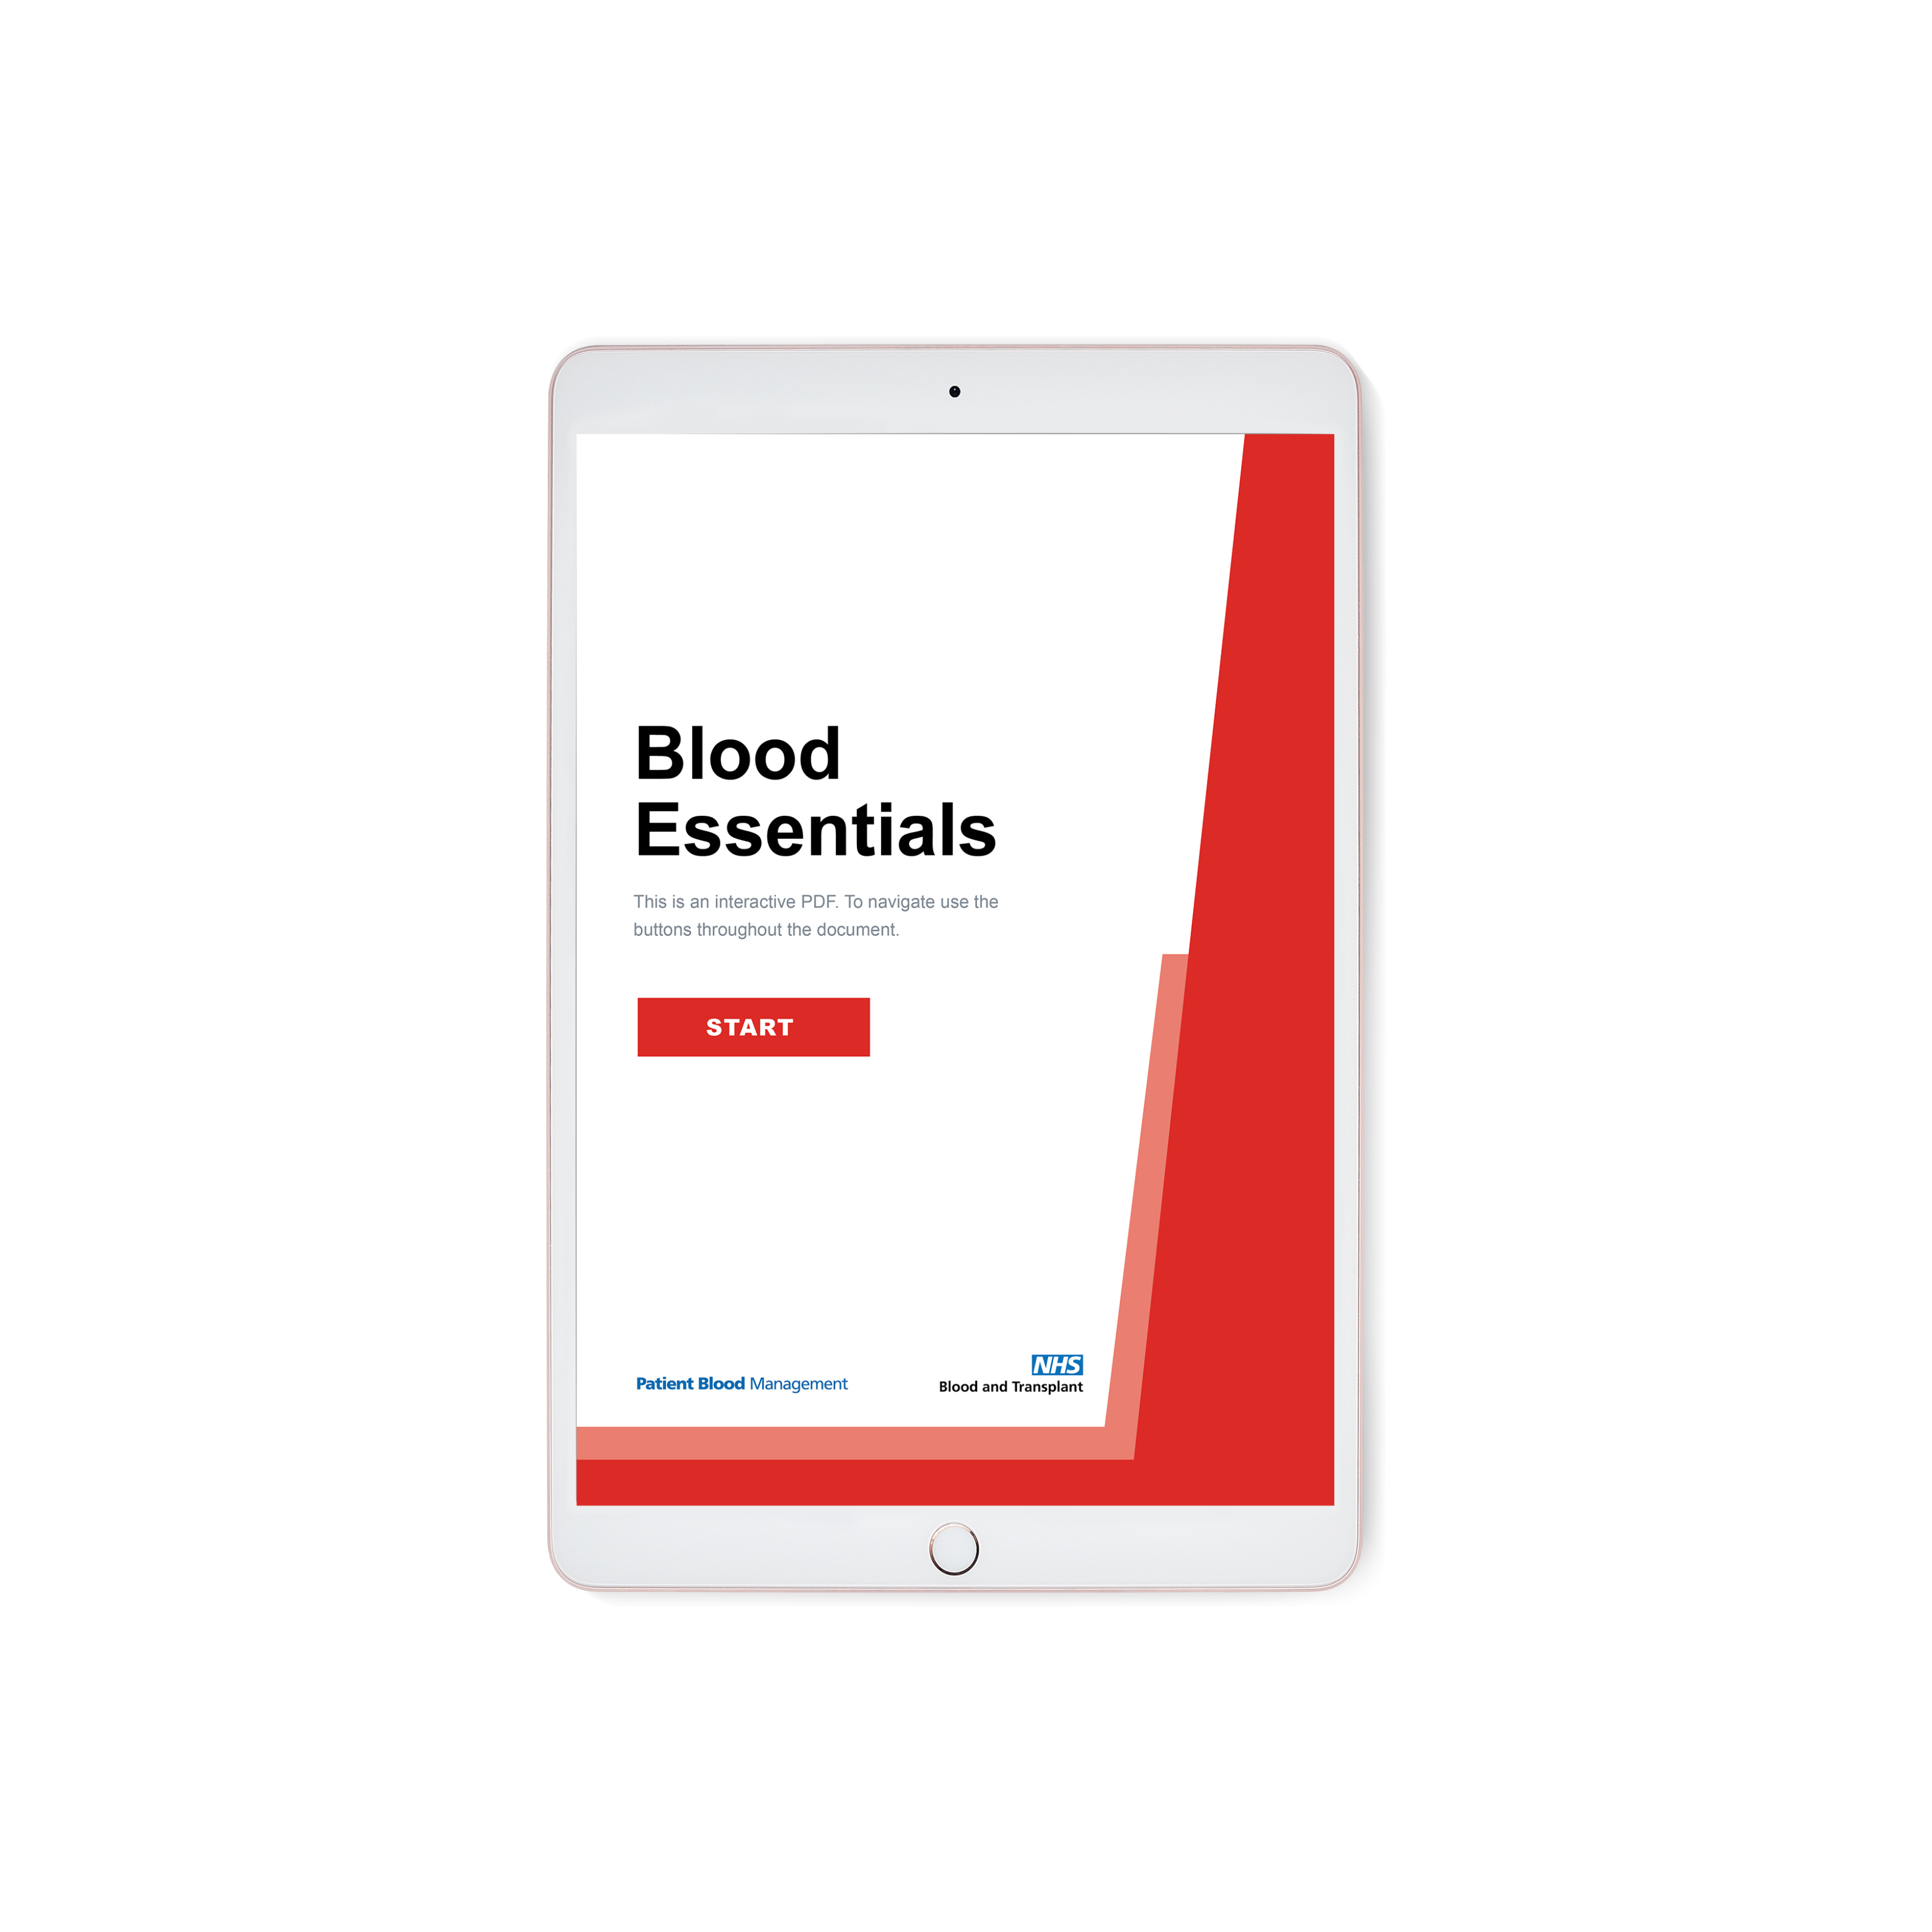 Image of Blood Essentials front page